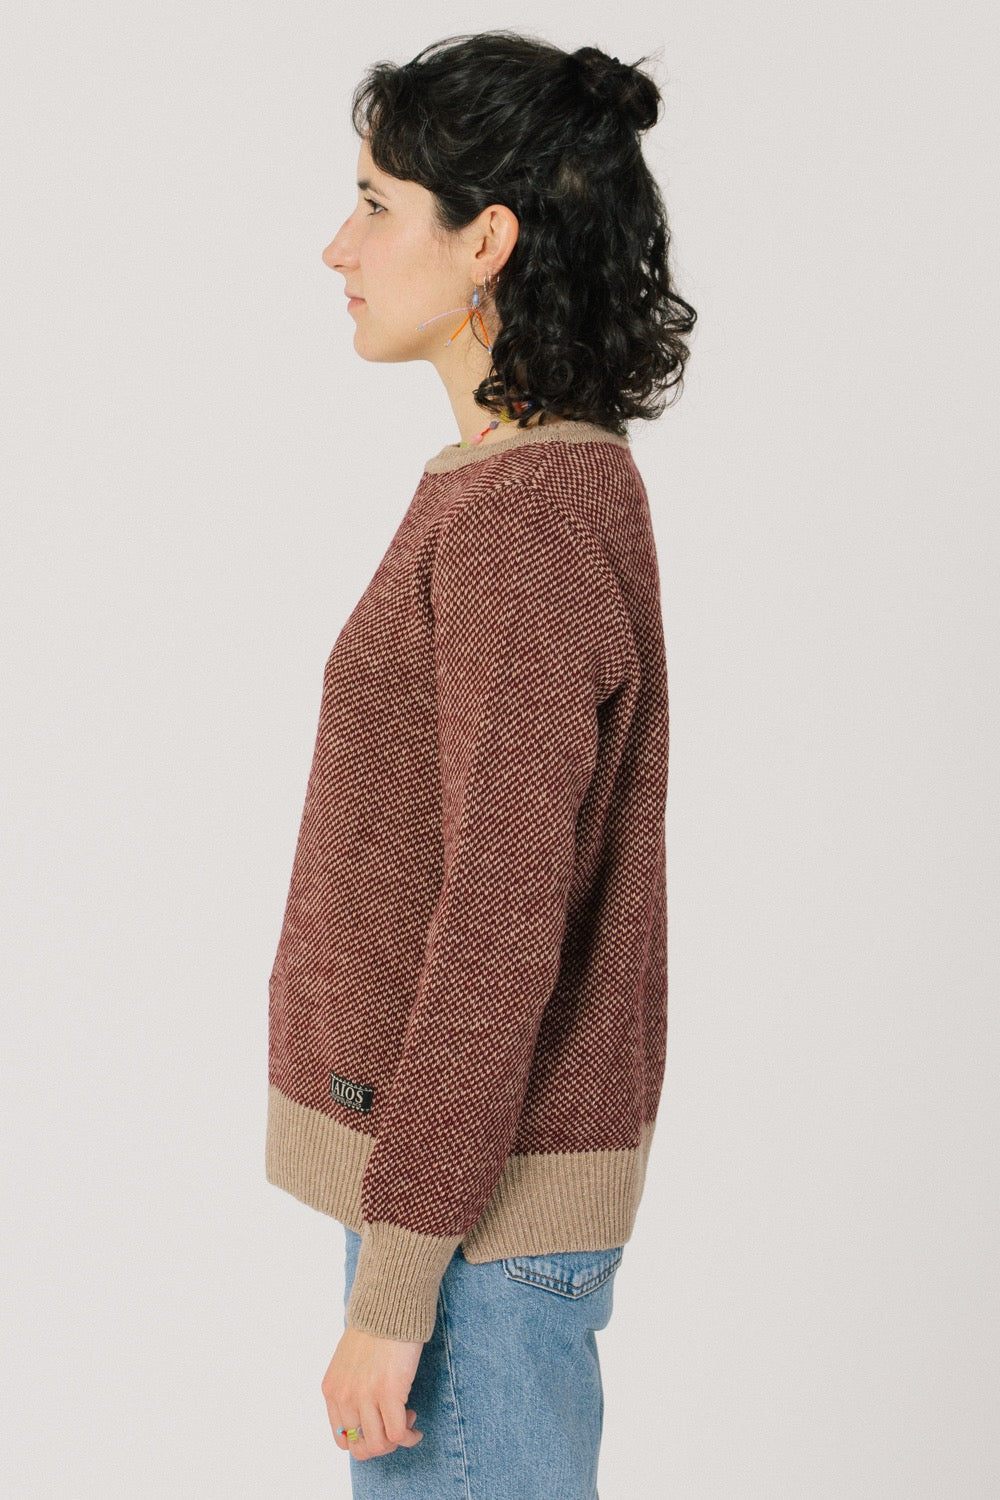 The shape of the sweater is the basic straight pattern with some cuts on the sides.